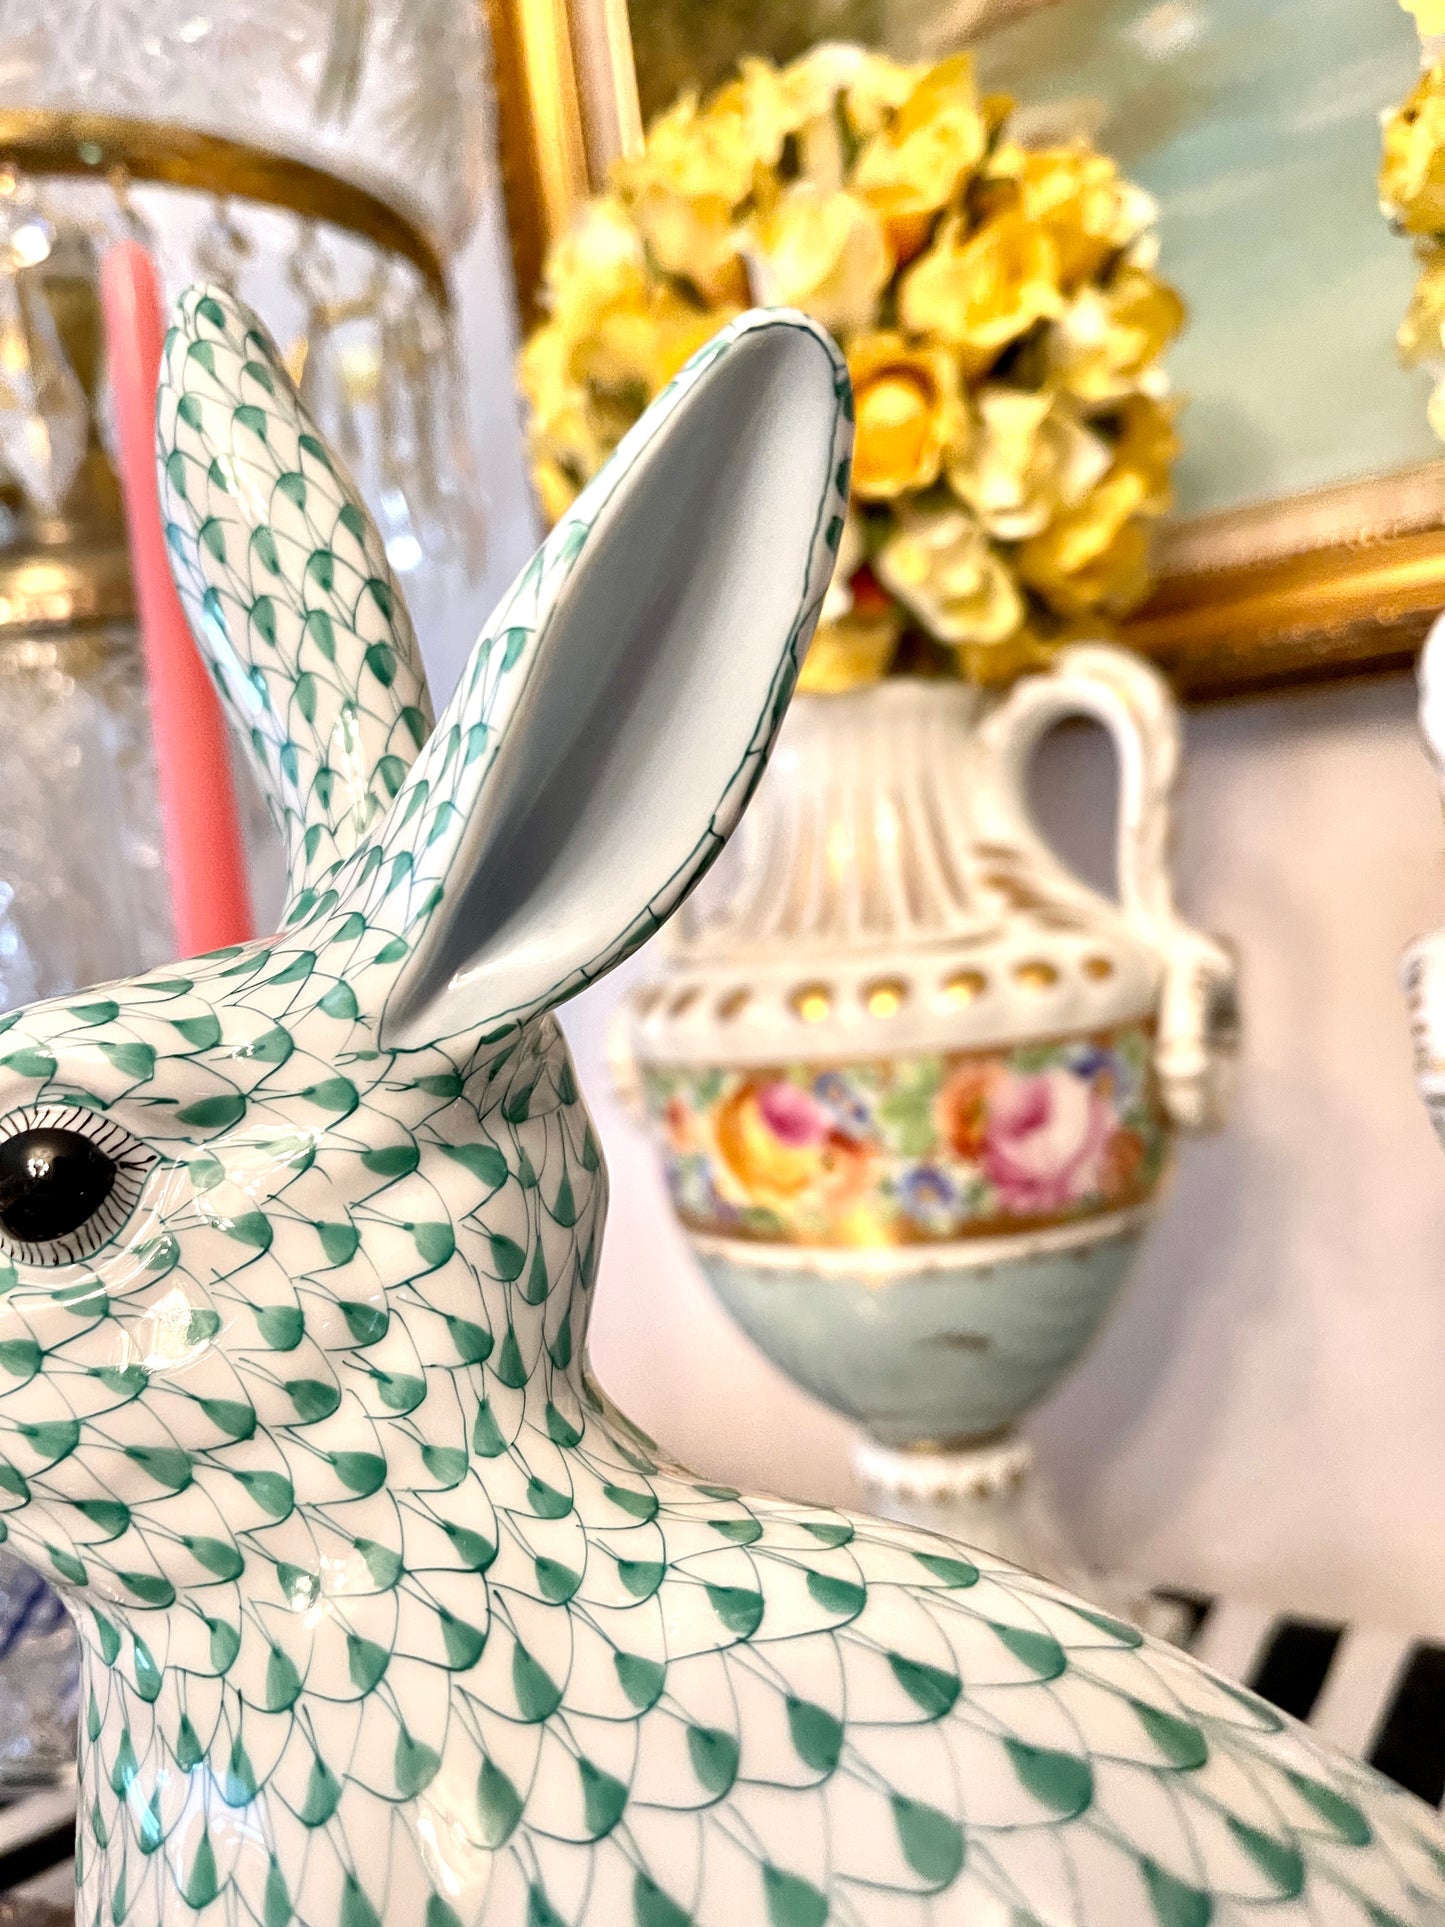 LARGE 11.75” Herend Rabbit, Hand Painted Porcelain with 22kt Gold Detail